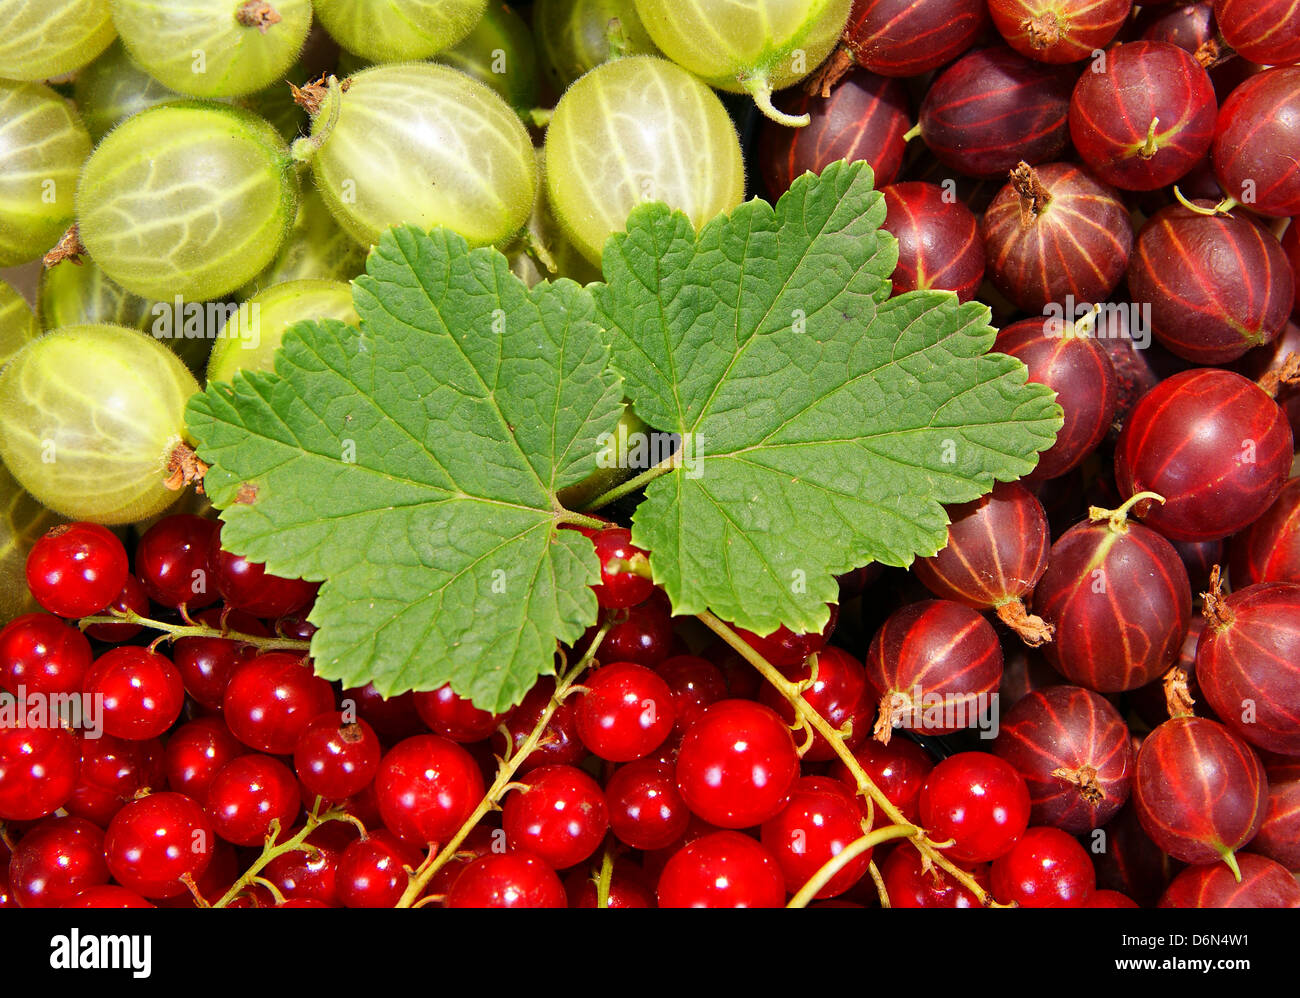 spilled red and green fruit as background Stock Photo